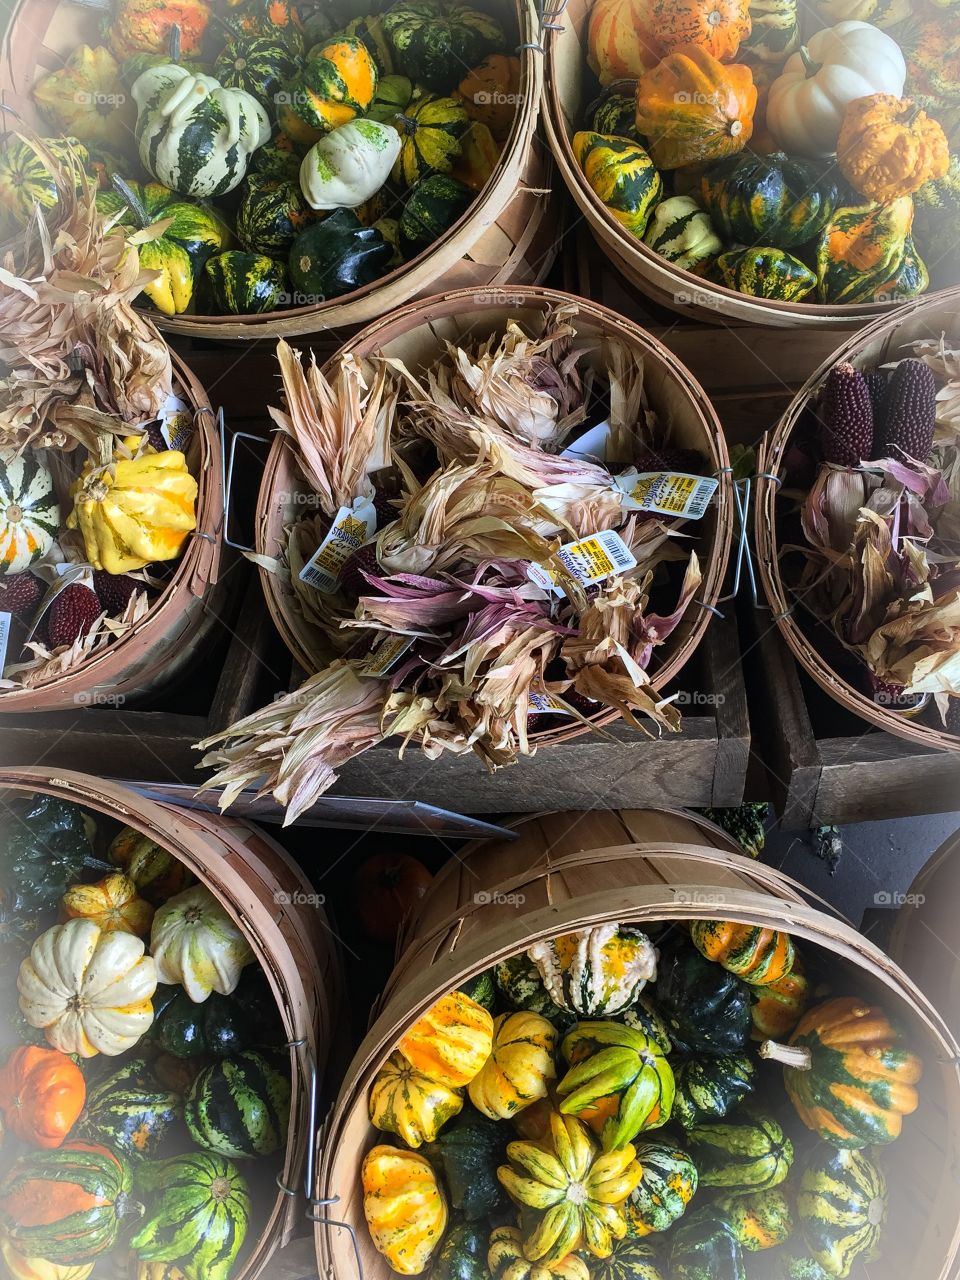 Fall colours are in the air in the local market with colourful gourds